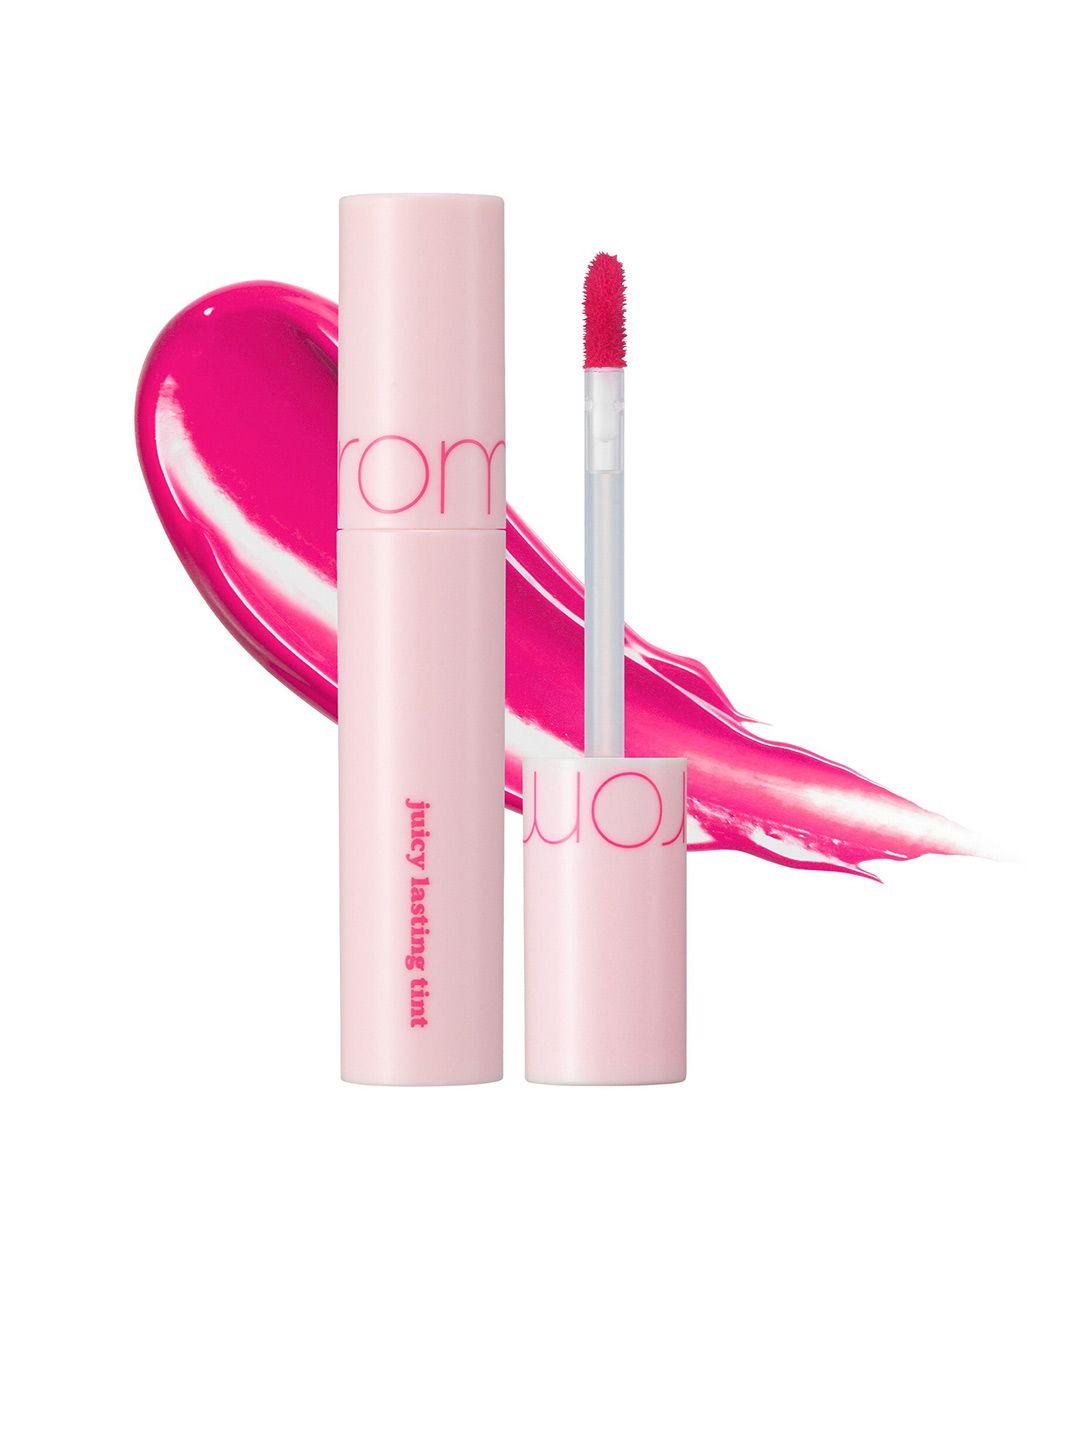 rom&nd juicy lasting lip tint - 5.5g - pink popsicle 27